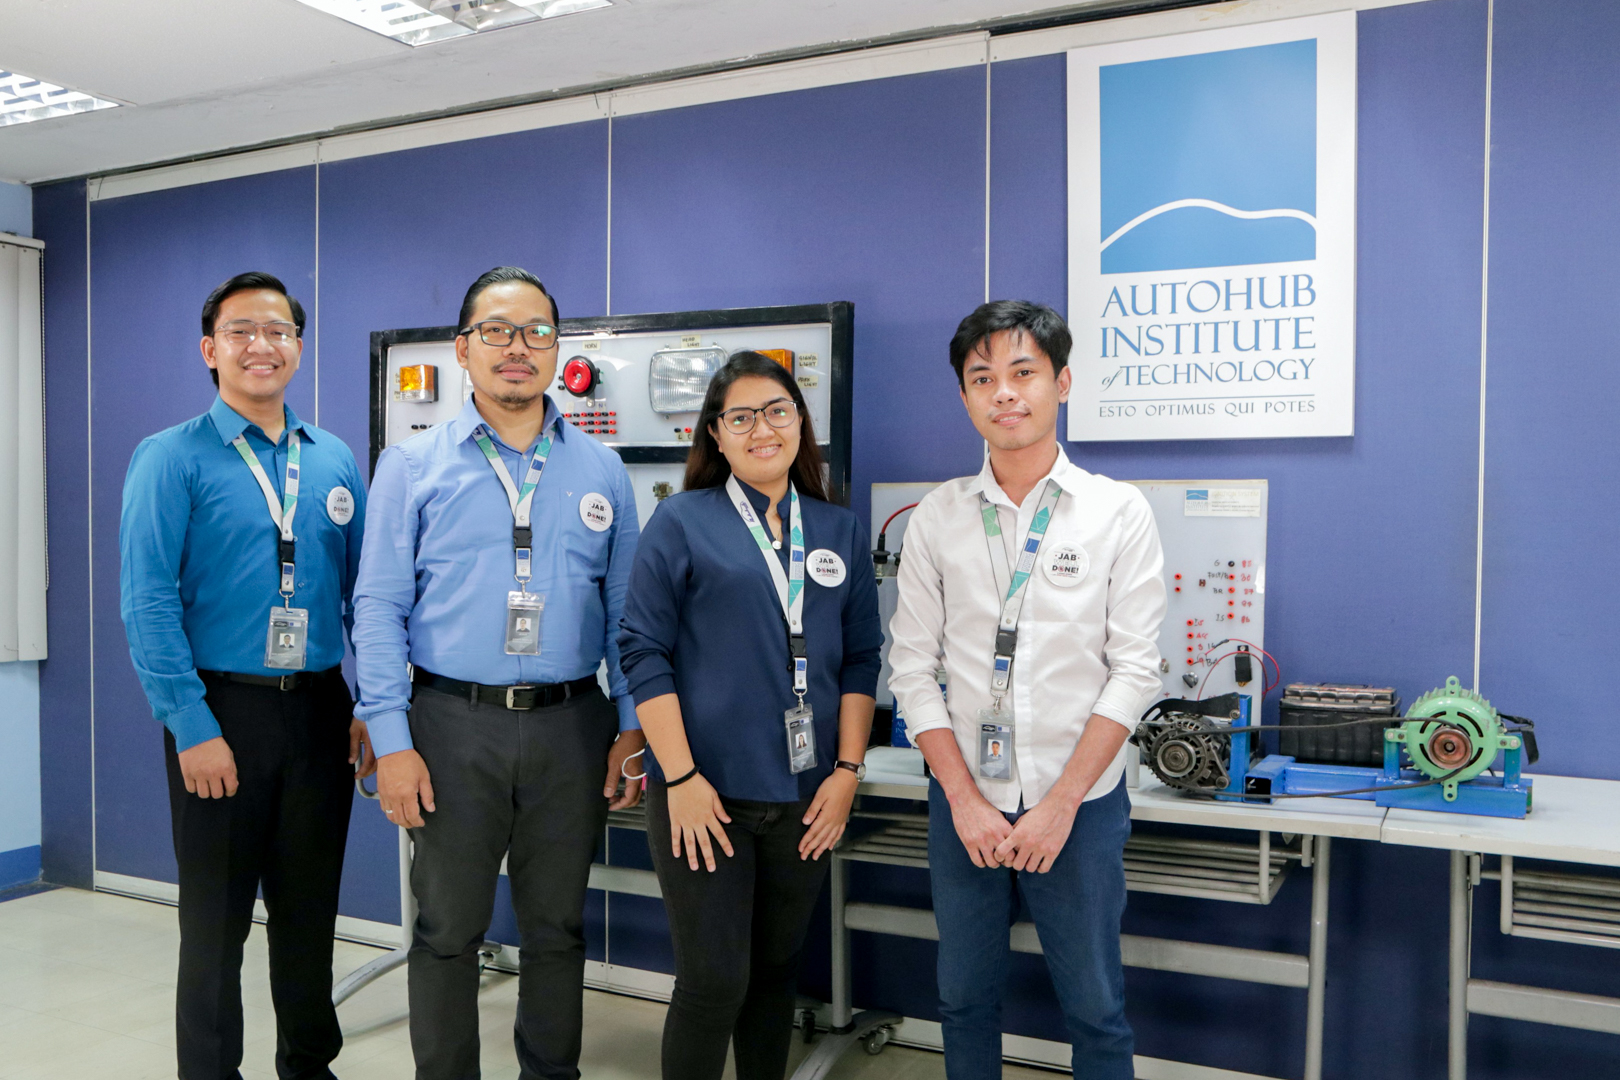 Autohub Institute of Technology is more than just a learning pad